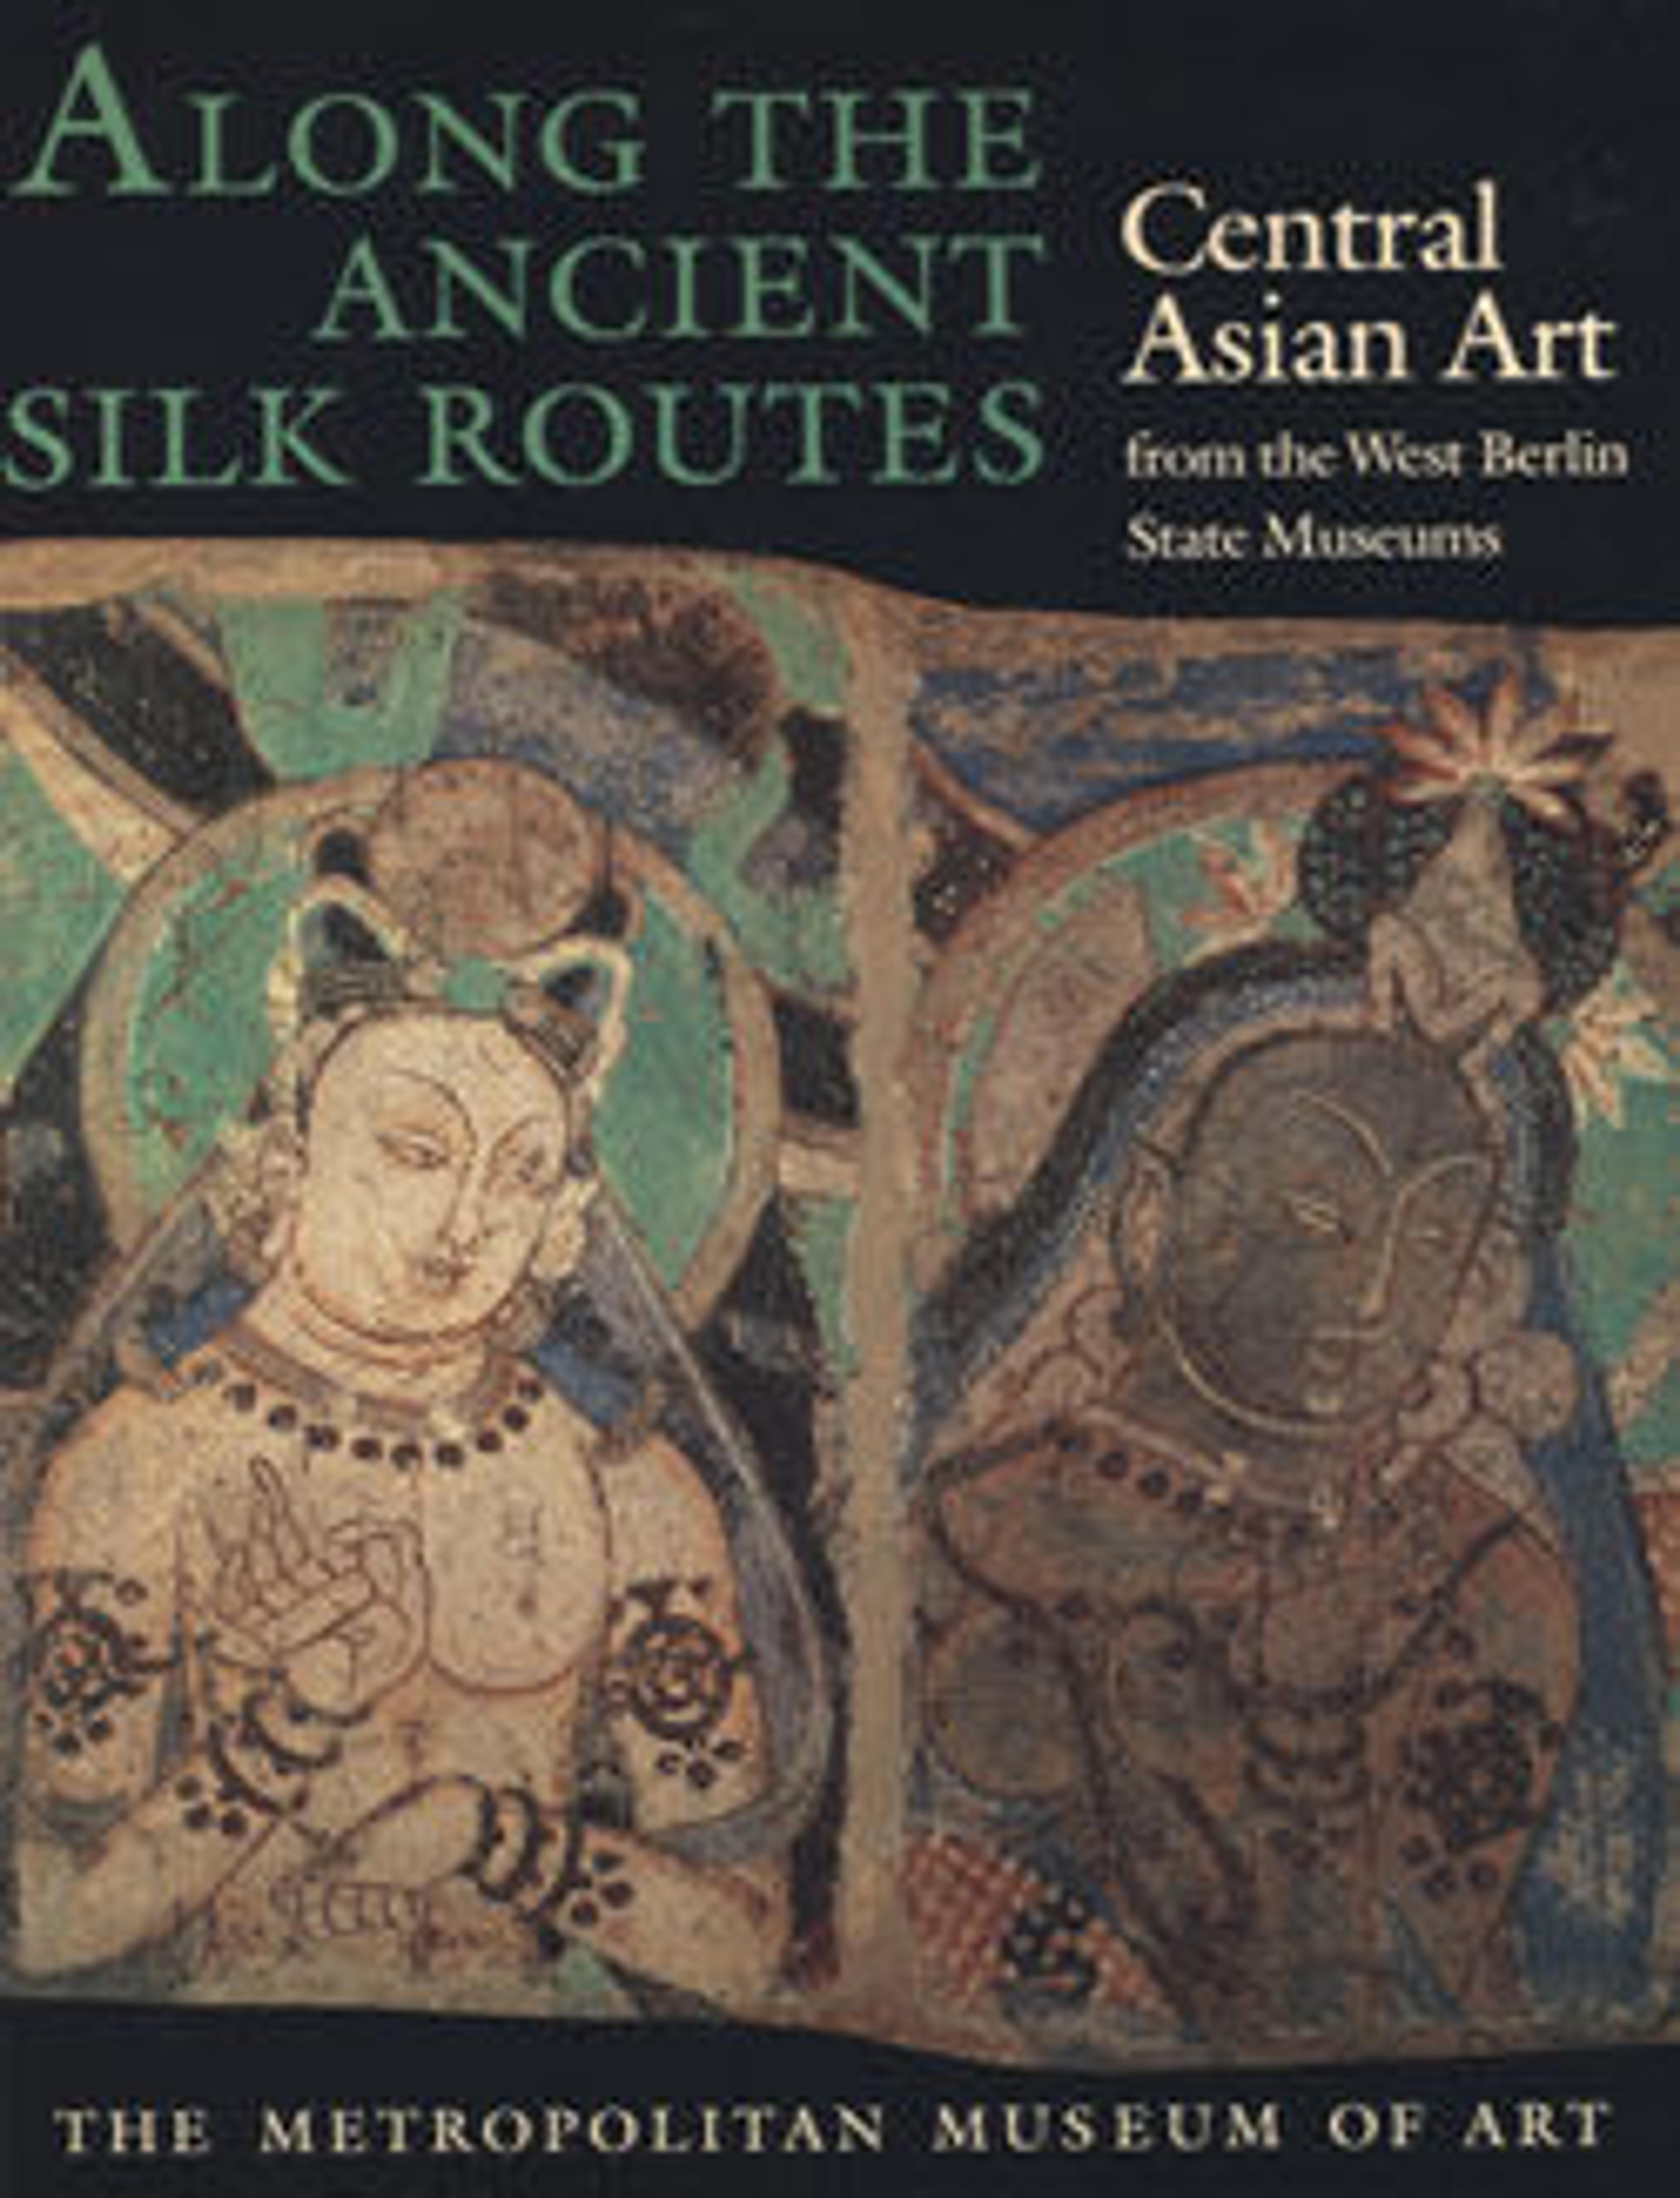 Along the Ancient Silk Routes: Central Asian Art from the West Berlin State Museums